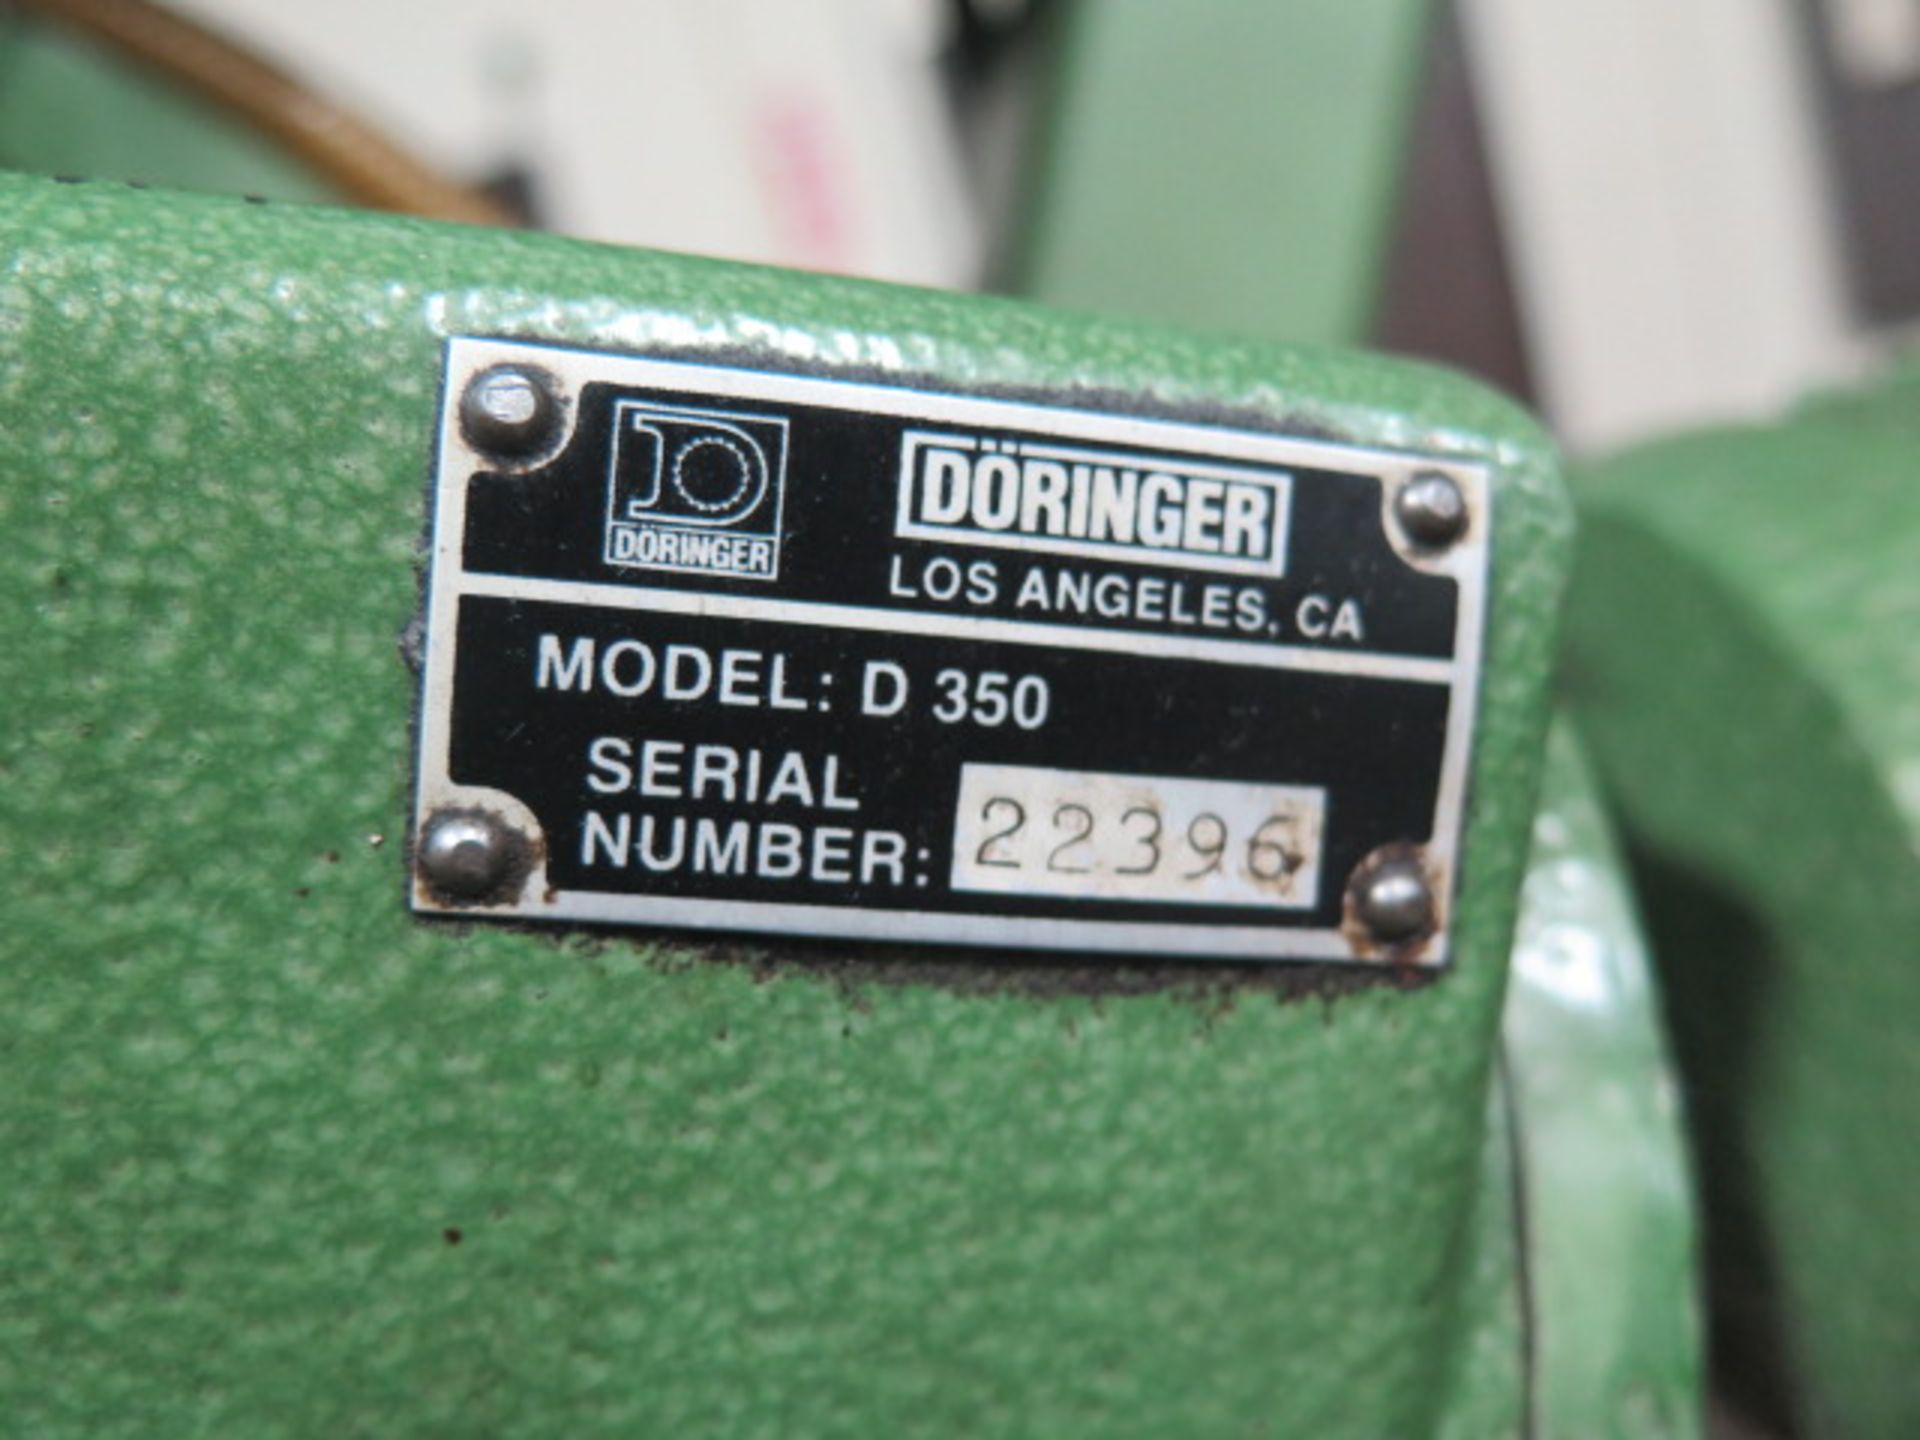 Doringer D350 14” Pneumatic Feed Miter Cold Saw s/n 22396 w/ 2-Speeds, Speed Clamping, SOLD AS IS - Image 13 of 13